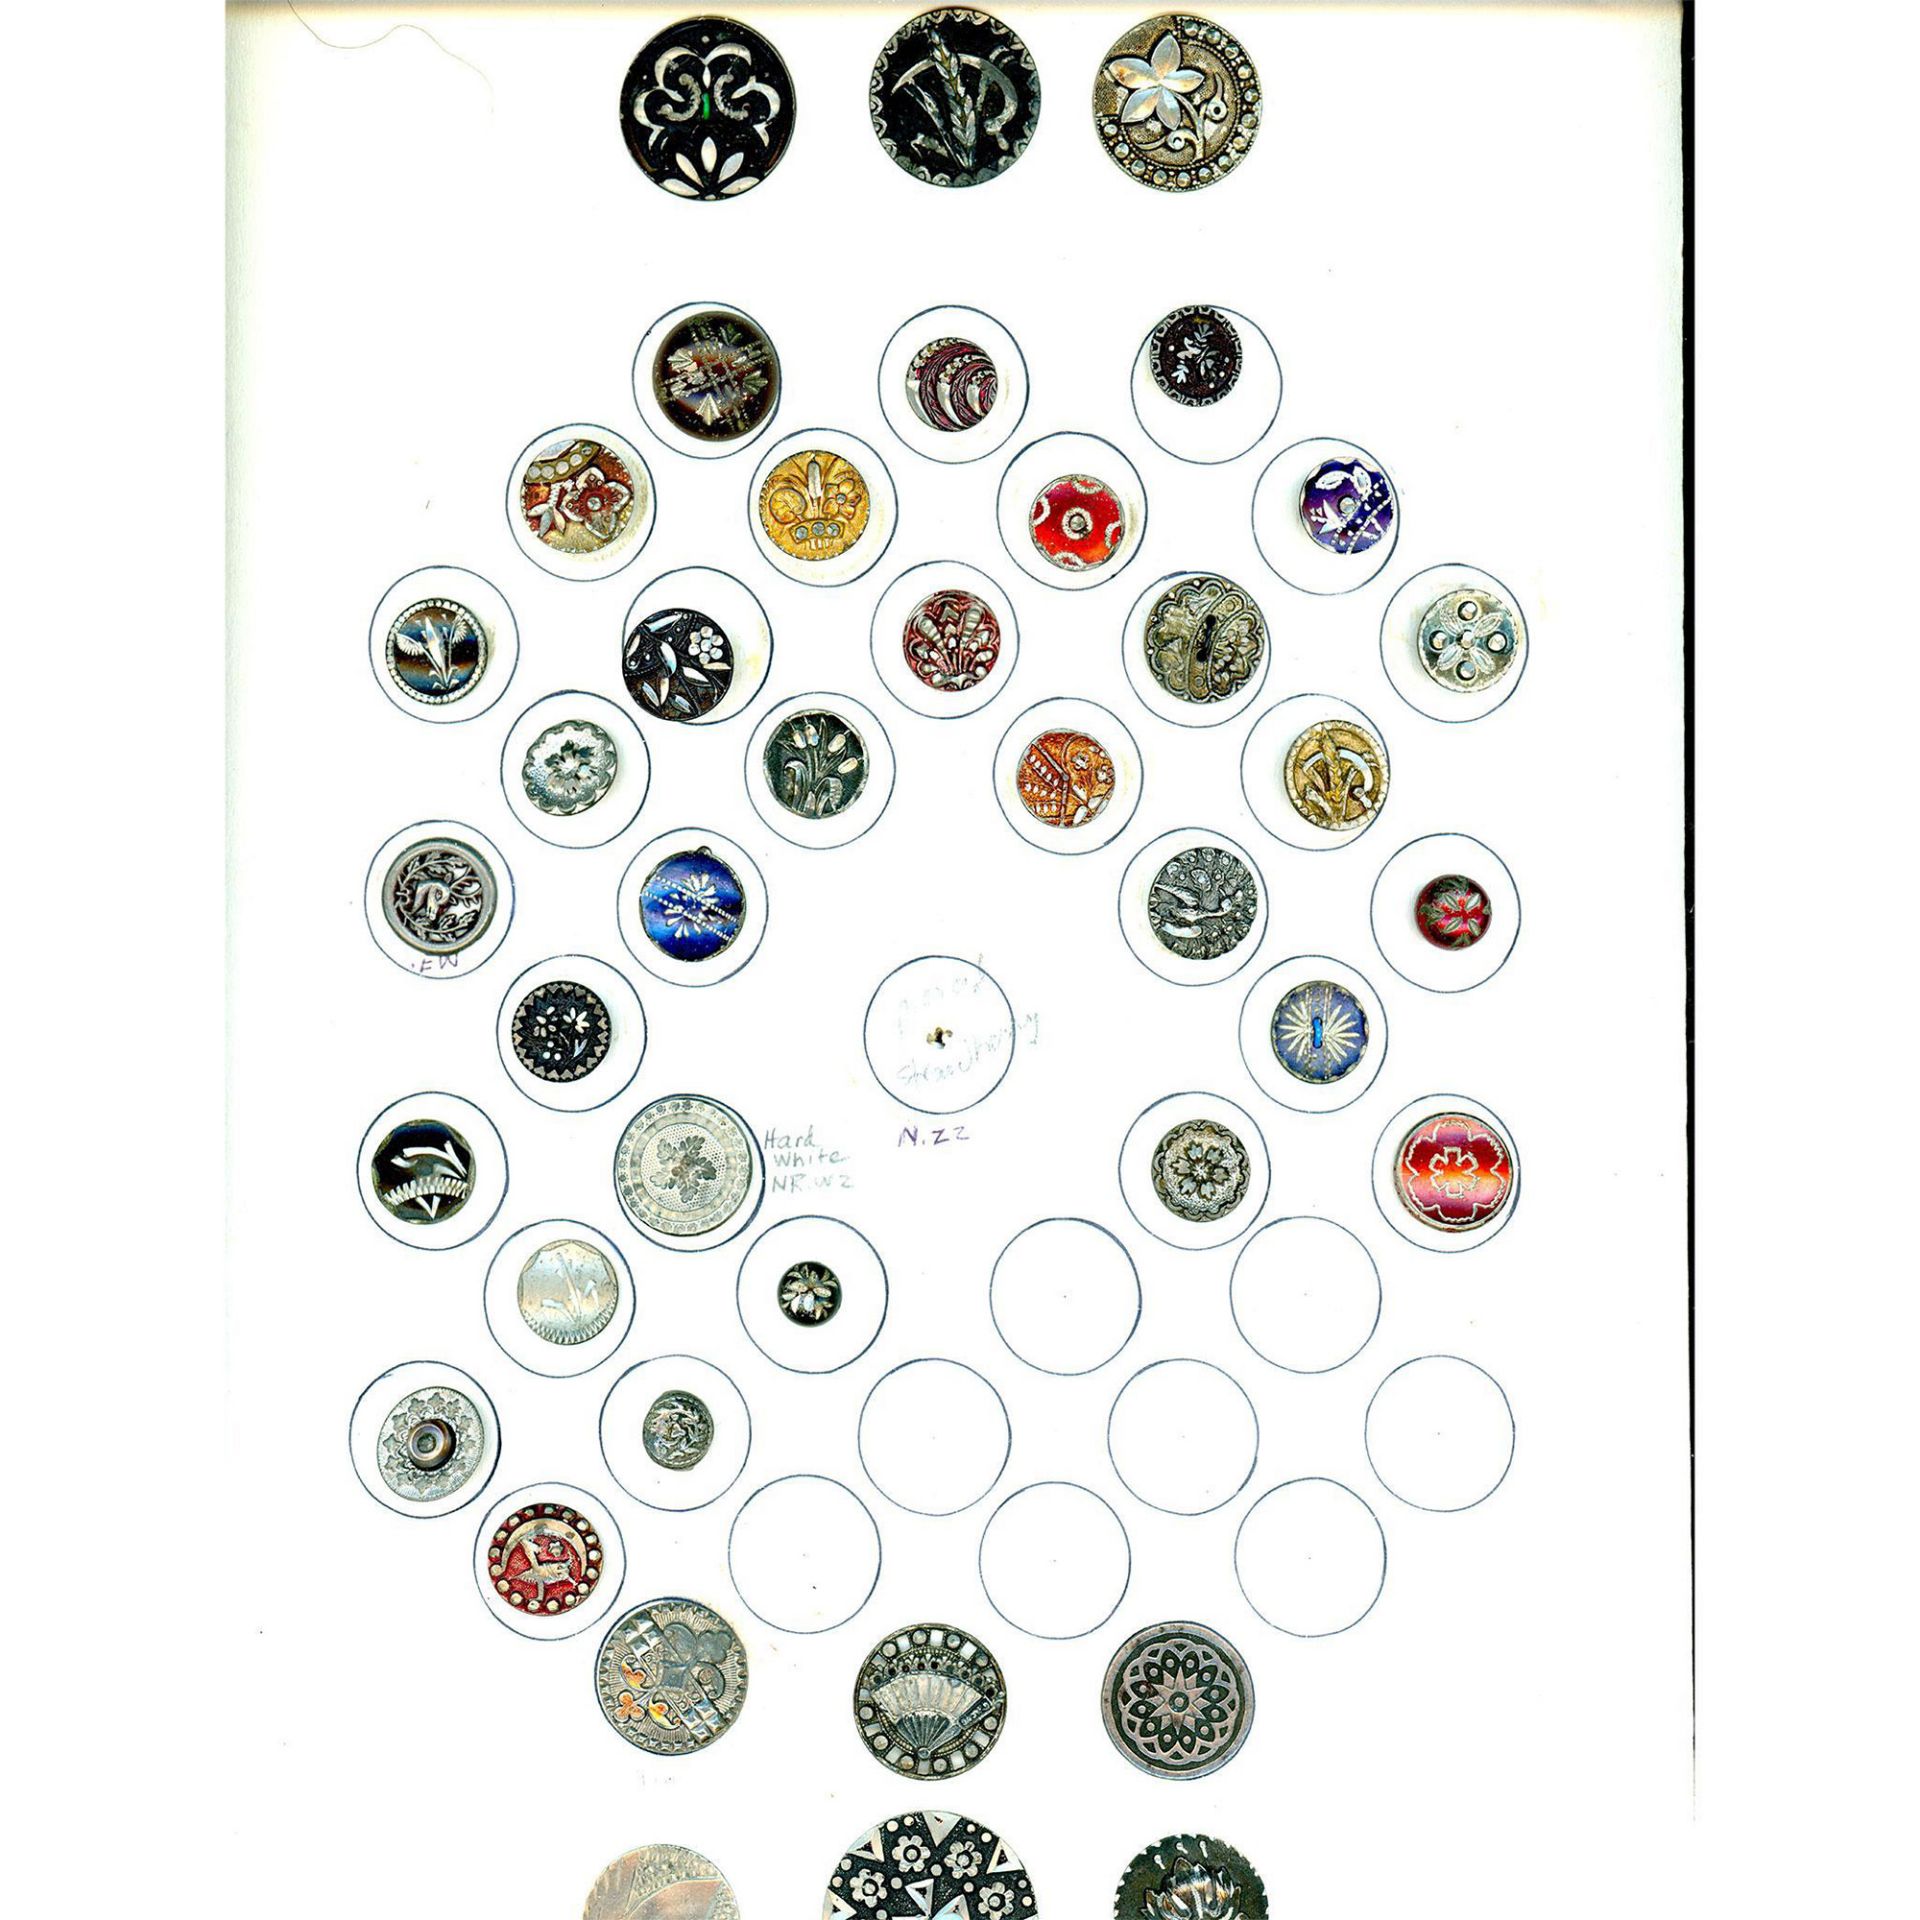 A Card of Division One Pewter Buttons